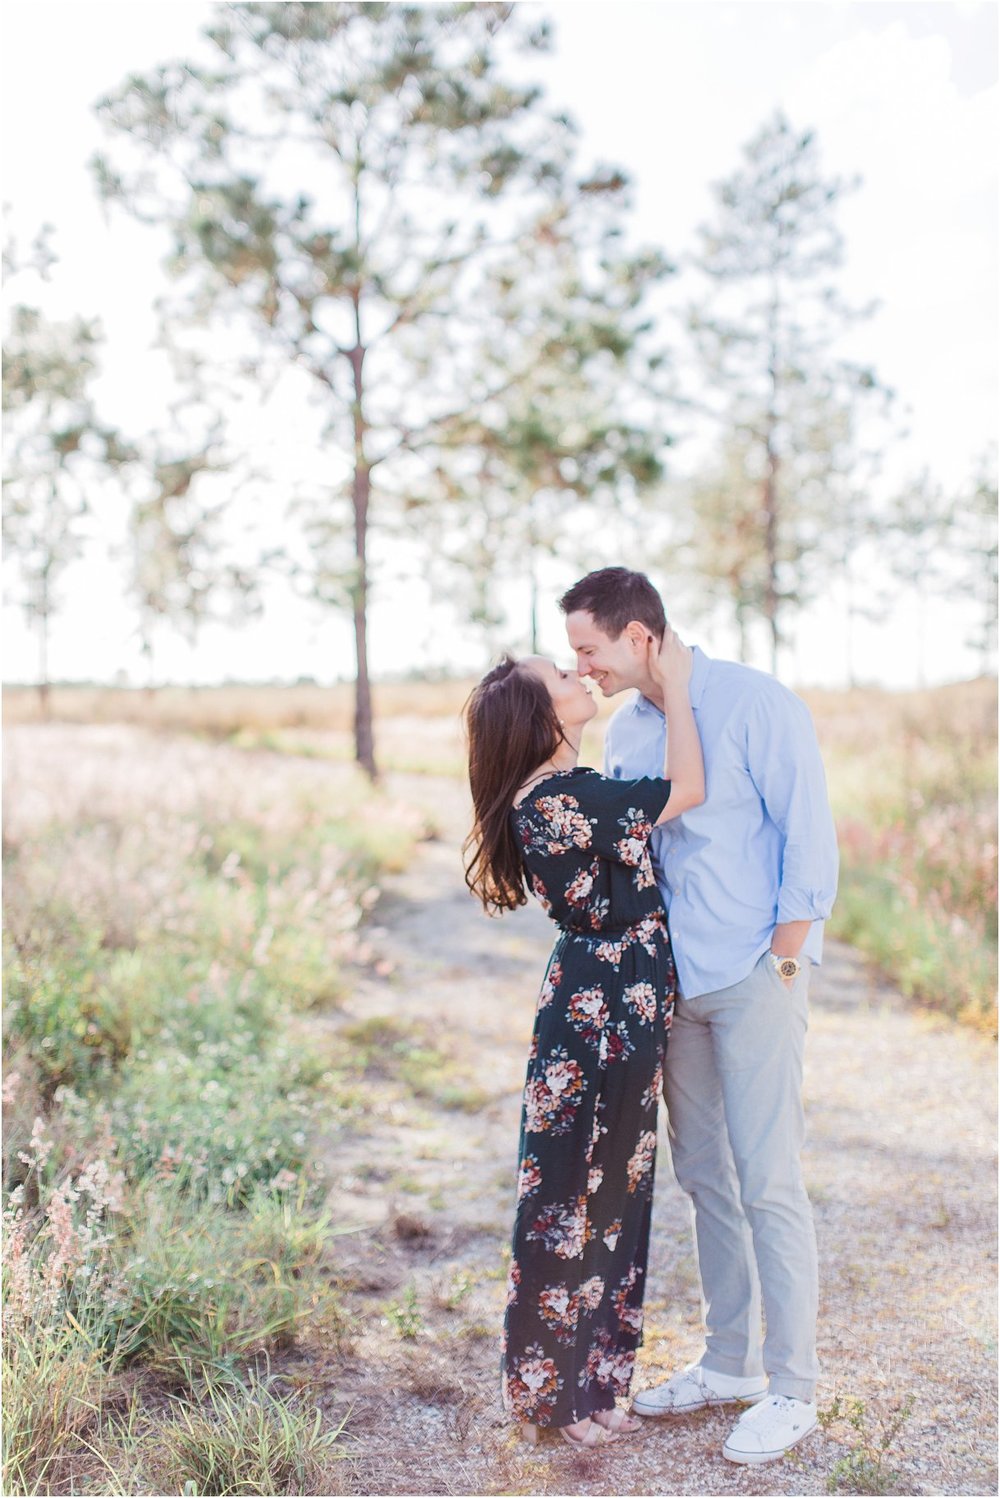 Bok Tower Engagement Session Fall Florida Tampa St Augustine DeLand Wedding Photographer20.jpg